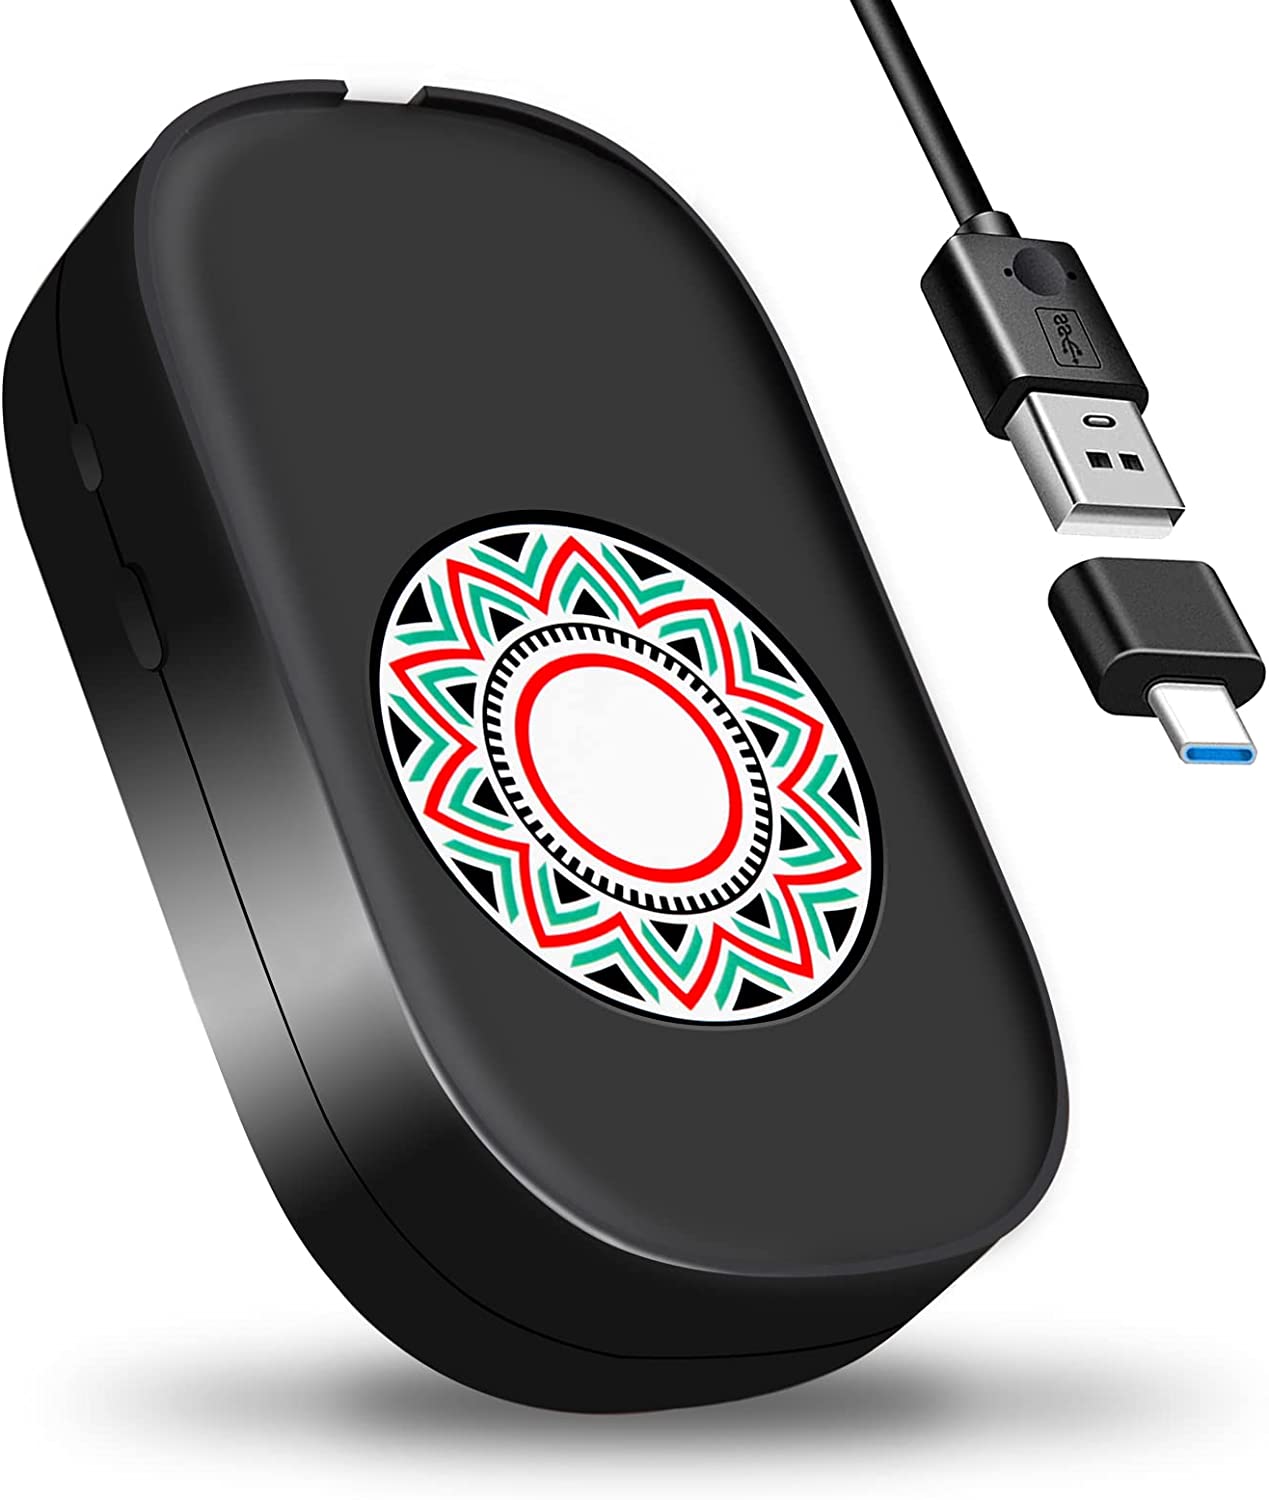 Undetectable Mouse Mover Mouse Jiggler Keeps PC Active No Software Randomly Automatic Driver-Free Prevents Computer Laptops From Sleeping Mode